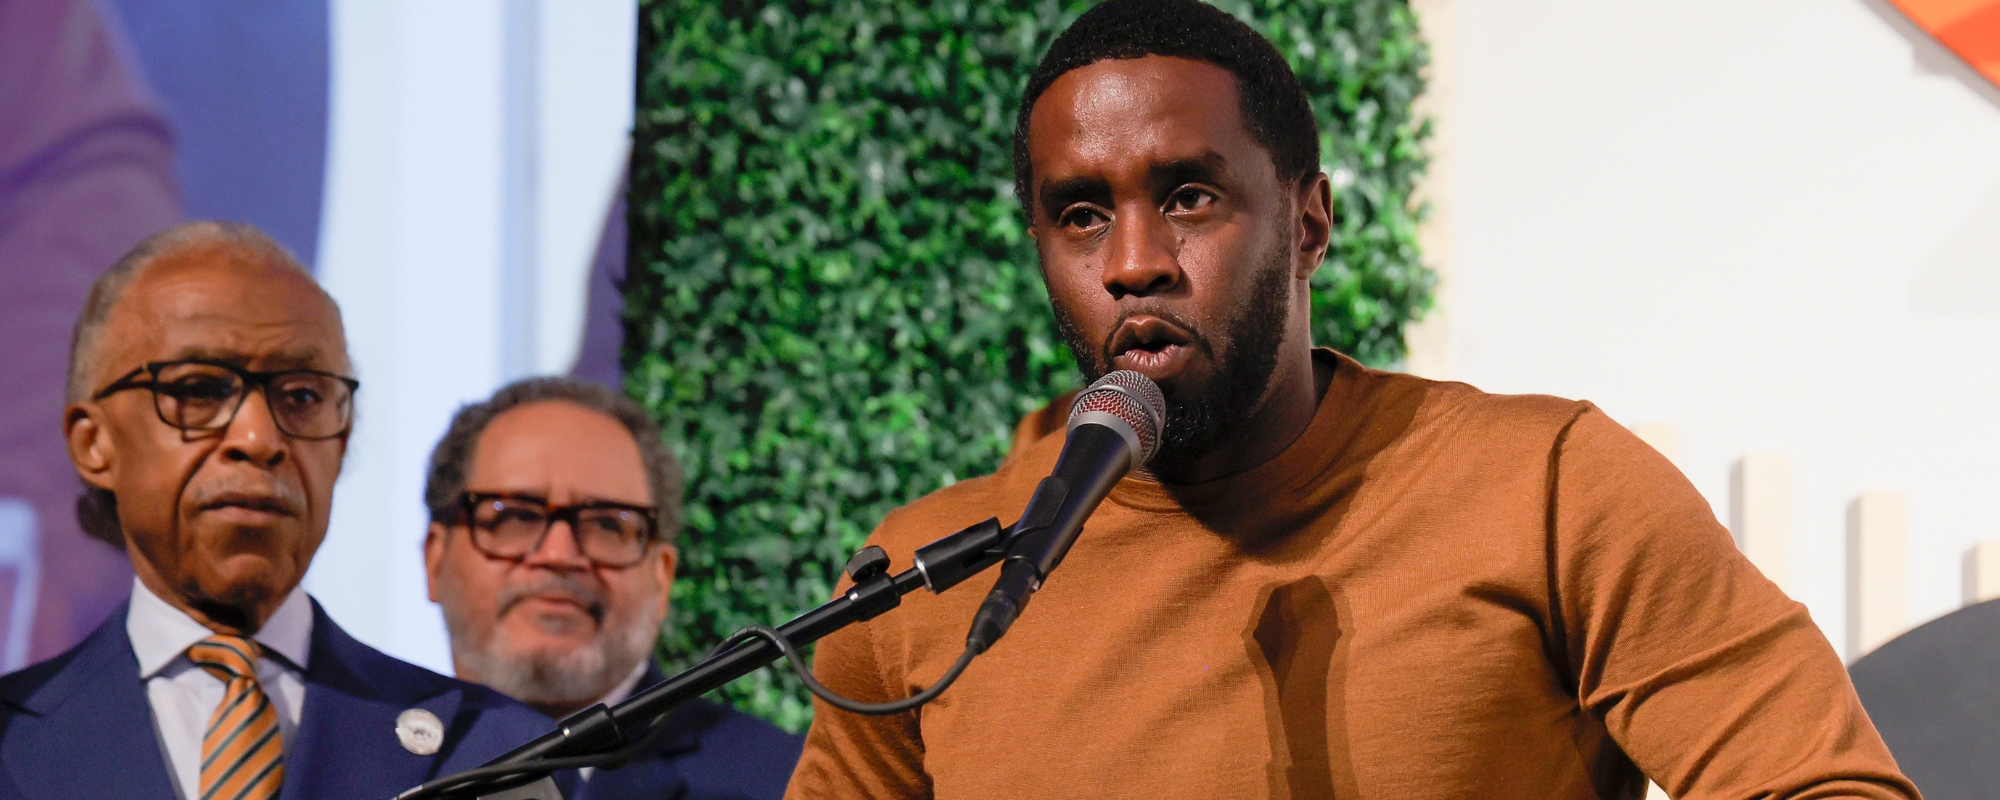 Sean ‘Diddy’ Combs Accused of Drugging and Sexually Assaulting a Woman in New Lawsuit